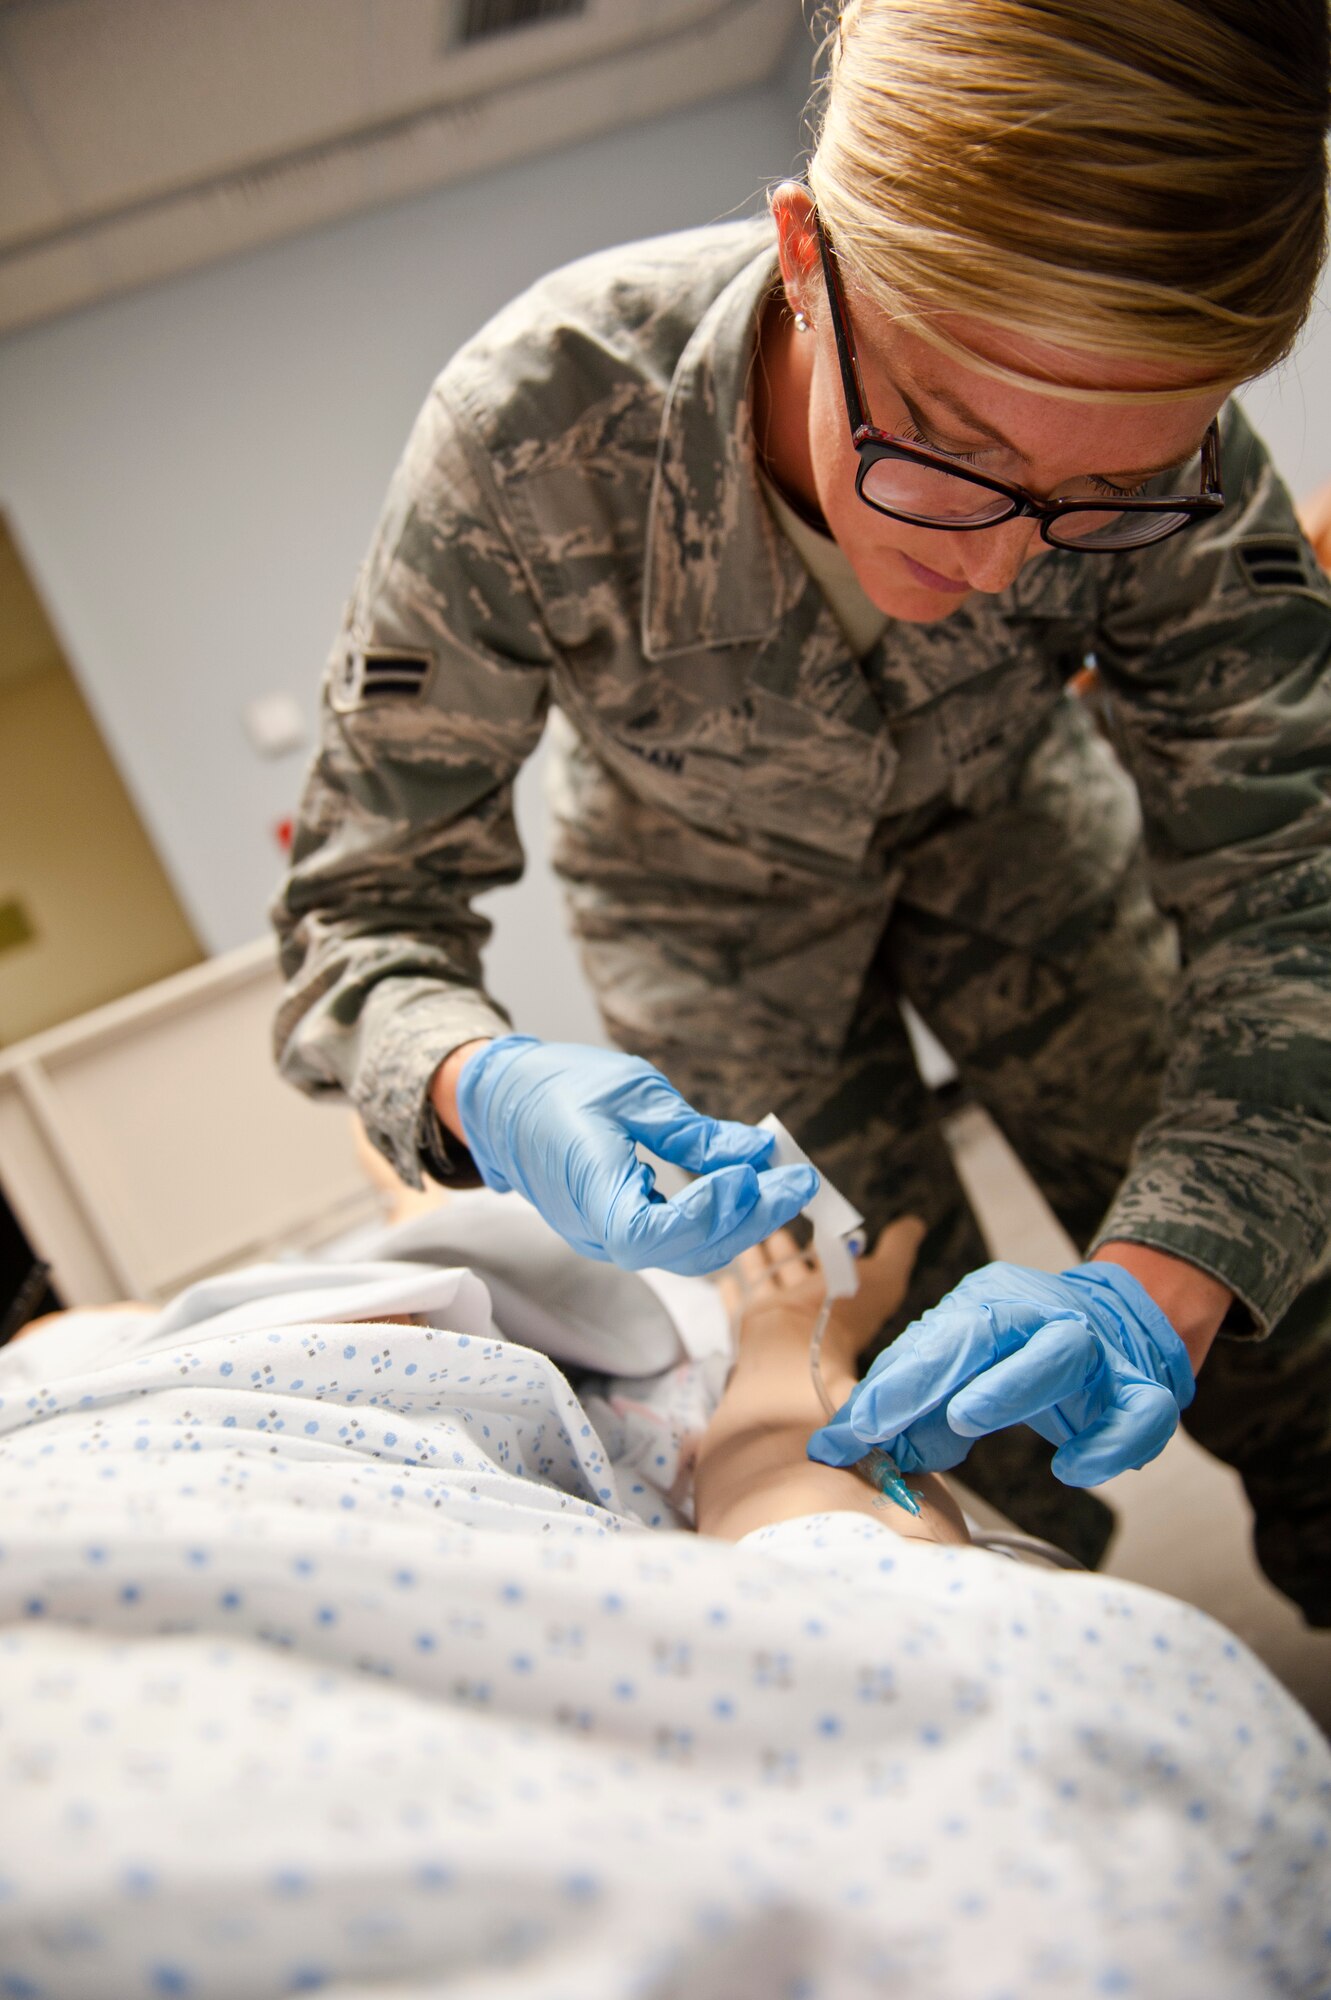 Airman 1st Class Valerie Essman, 39th Medical Operations Squadron ambulance serviceman, places an IV into a Sim Man medical dummy June 19, 2013, at Incirlik Air Base, Turkey. The Sim Man gives Airmen the opportunity to train on various scenarios in a realistic environment. (U.S. Air Force photo by Senior Airman Daniel Phelps/Released)